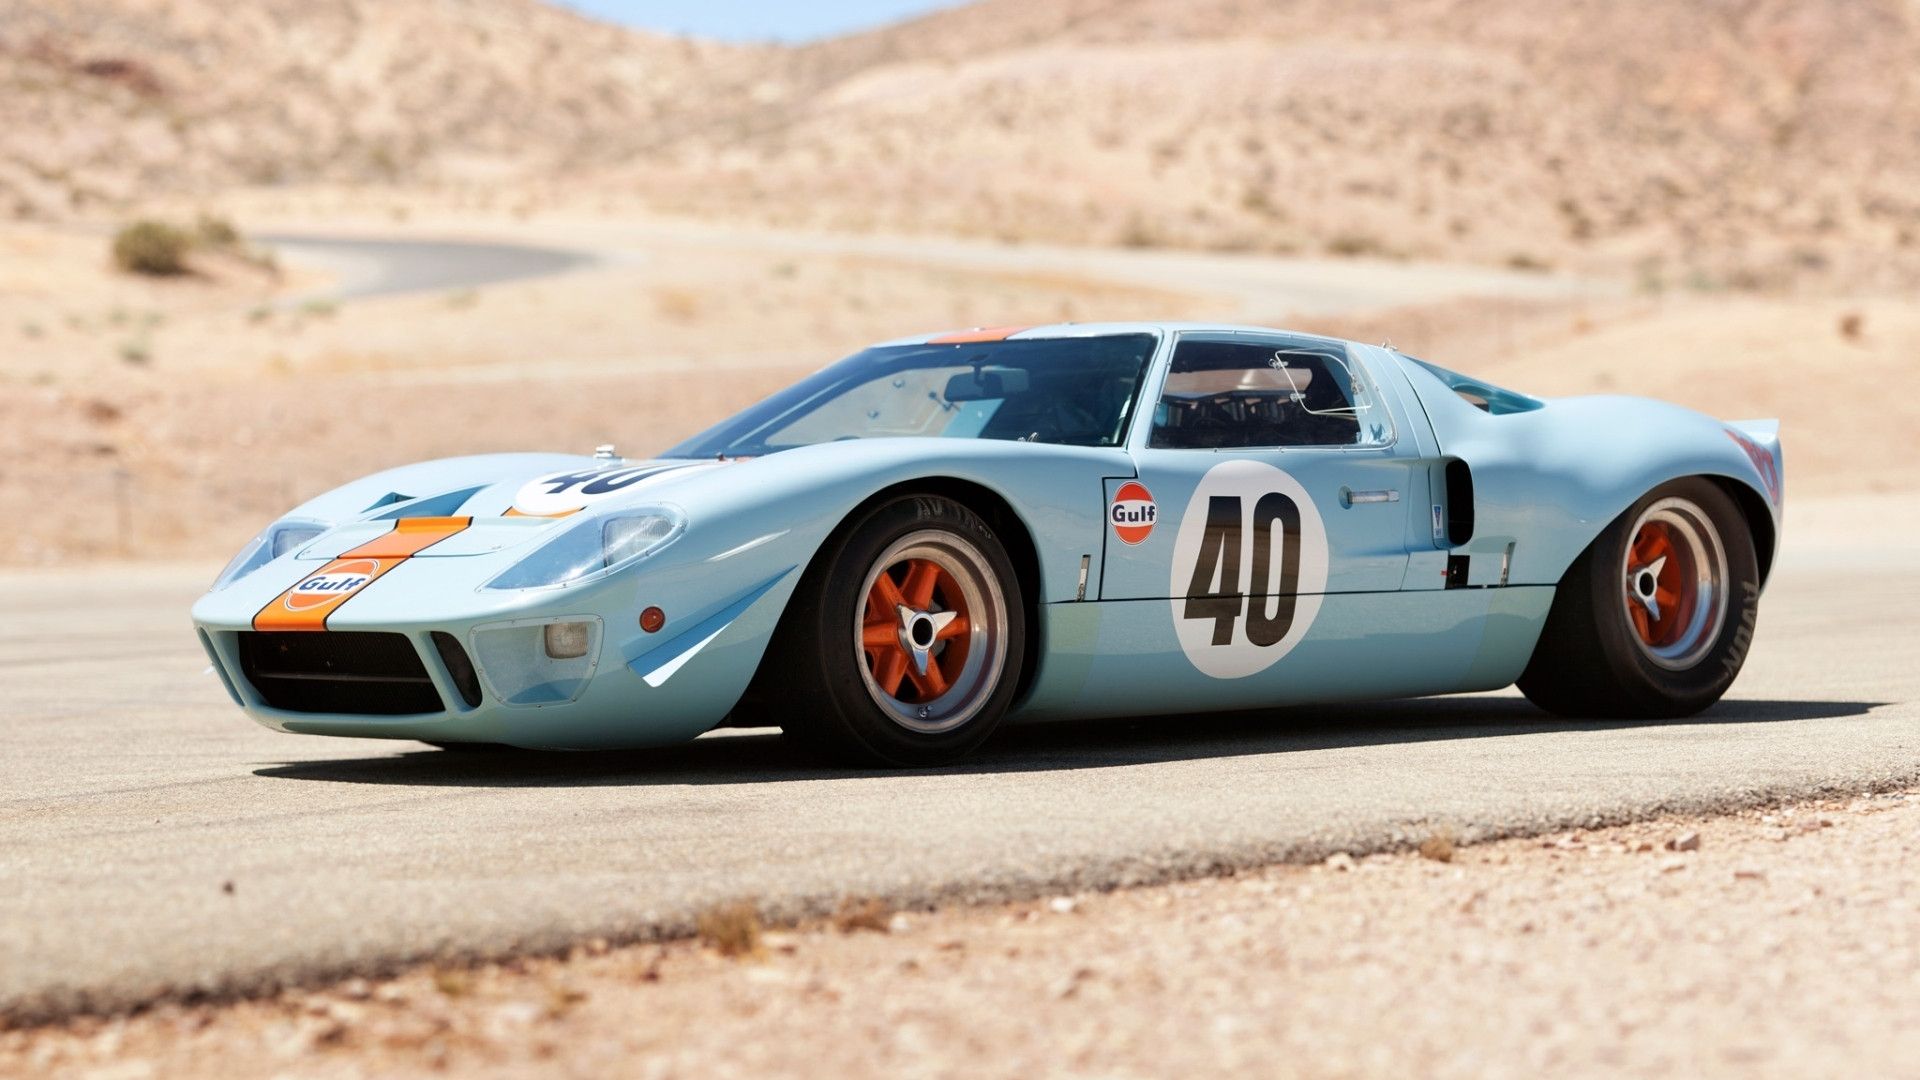 Ford Gt40 Wallpaper High Quality